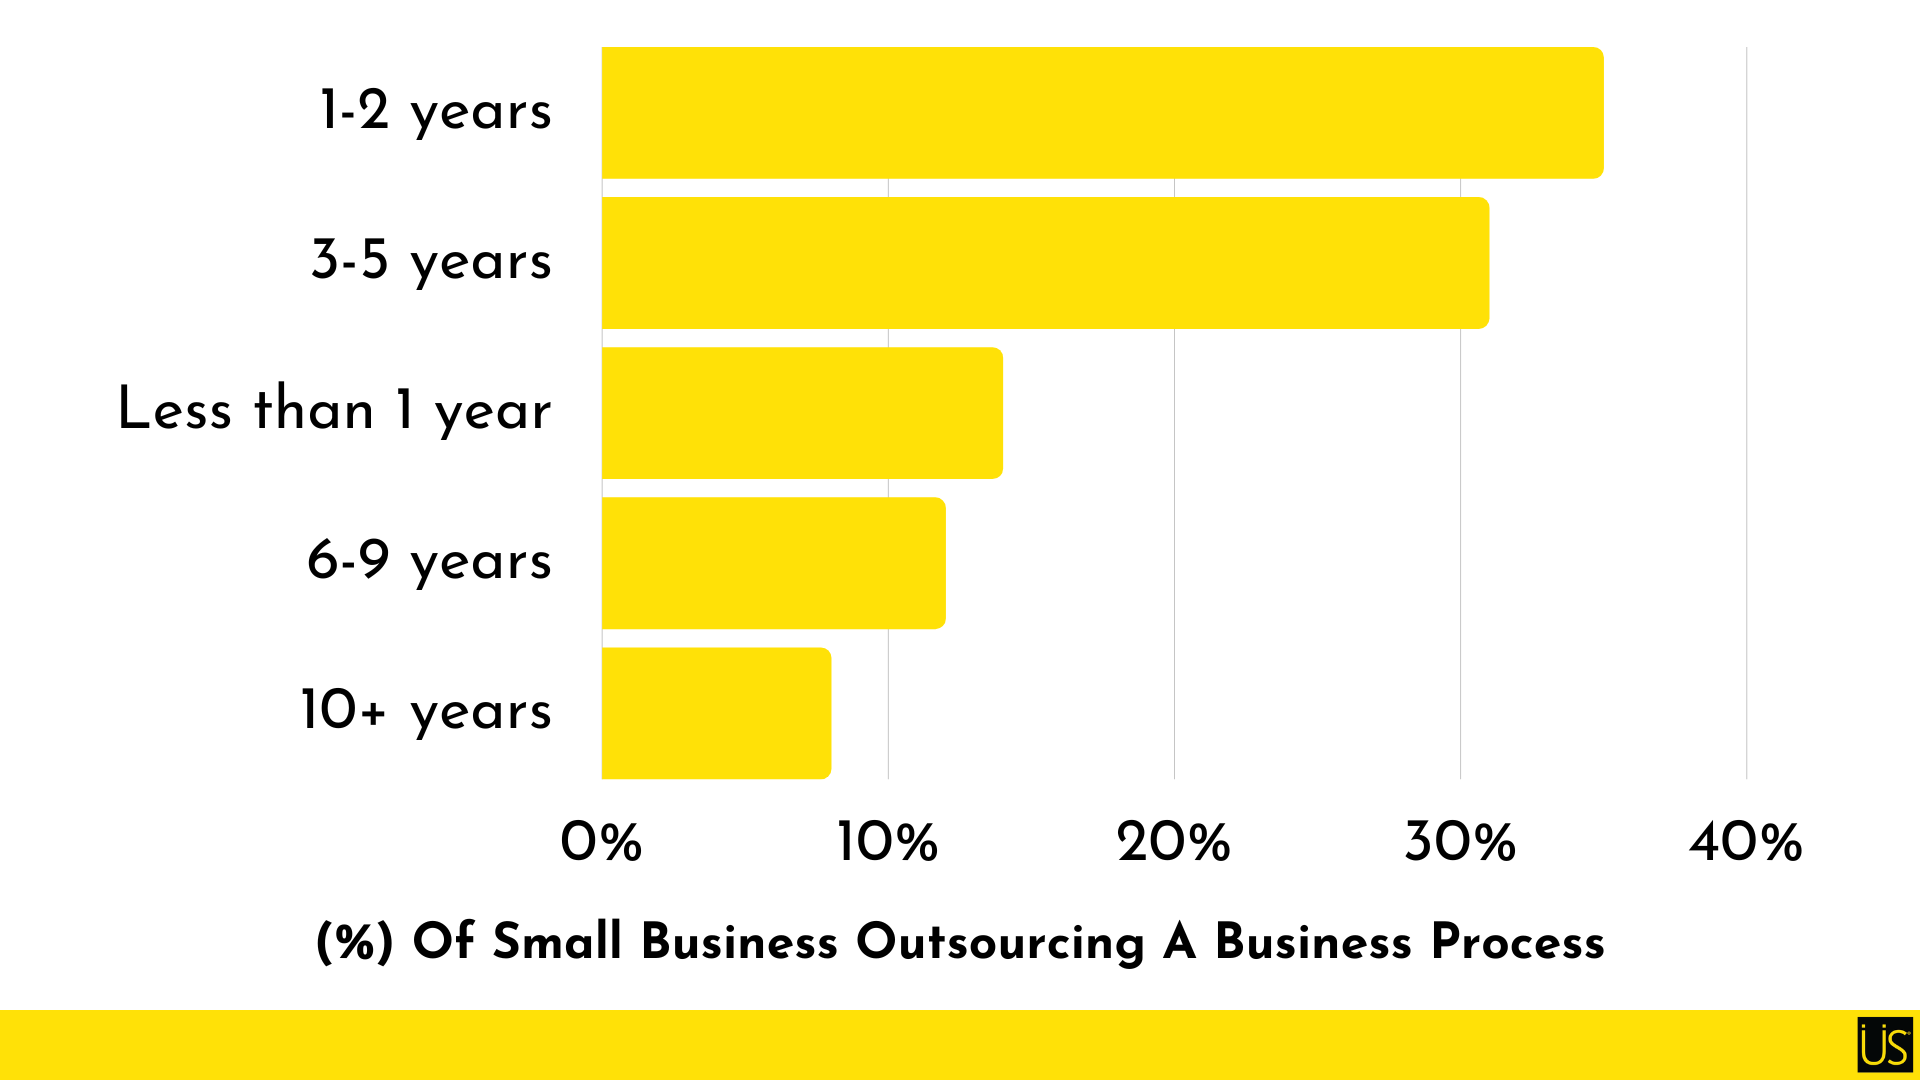 Statistics of businesses outsourcing